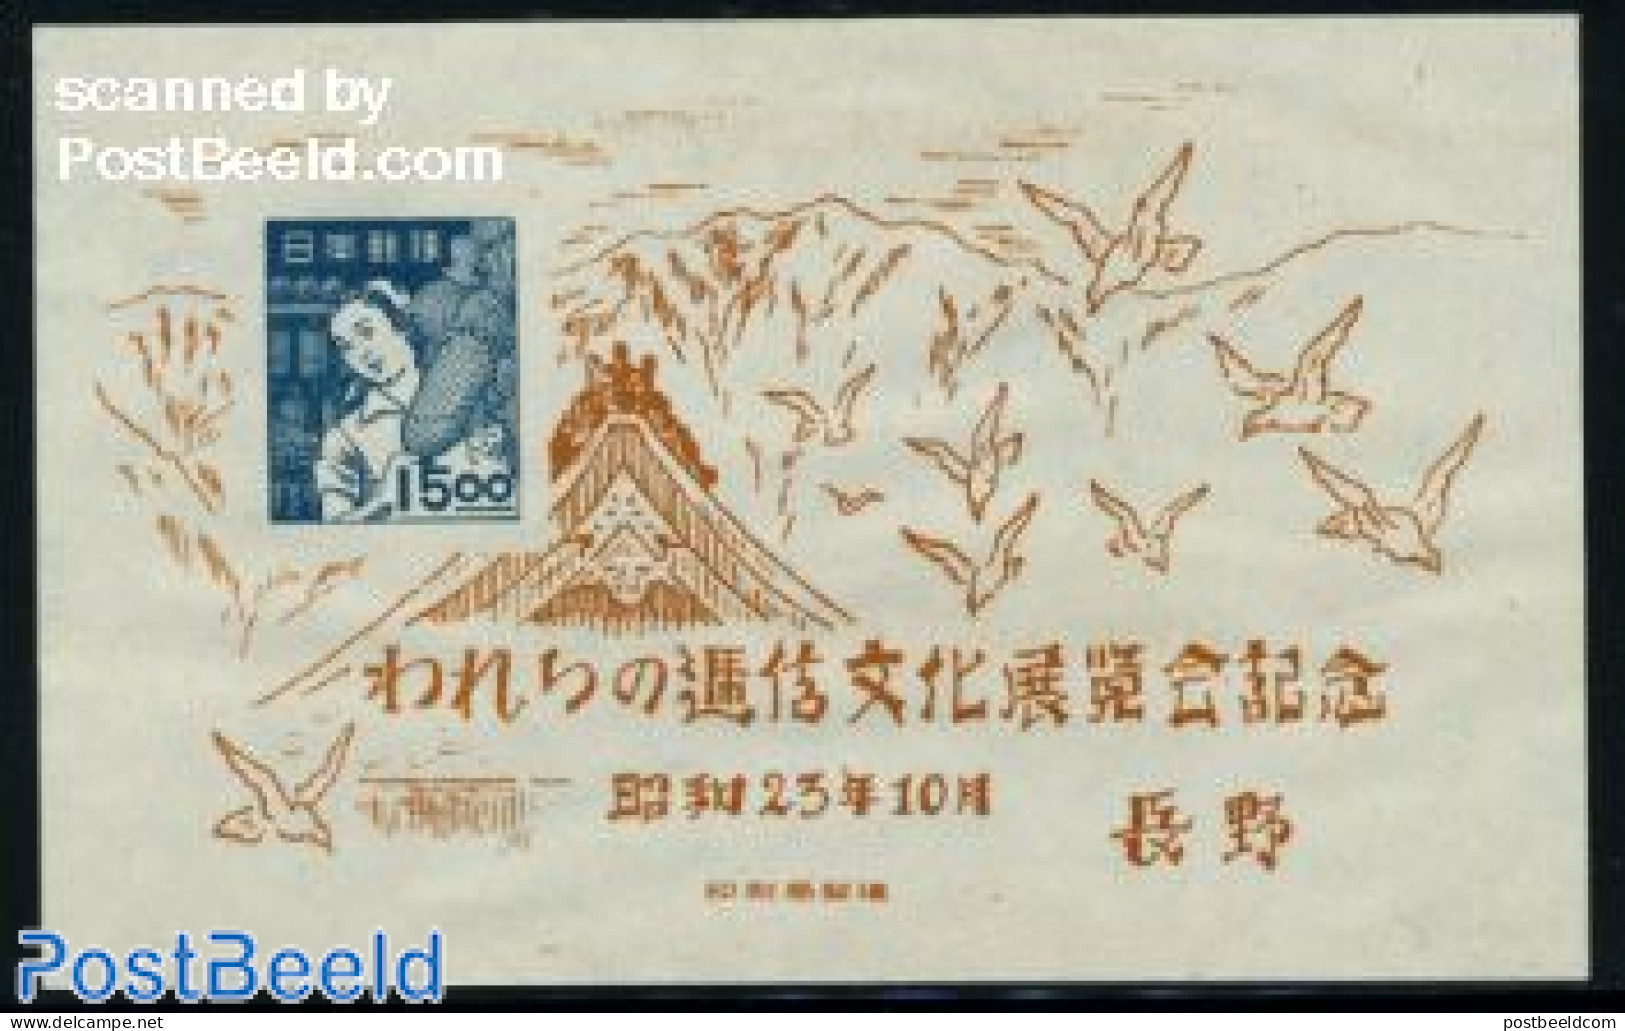 Japan 1948 Nagano Exposition S/s (issued Without Gum), Mint NH - Neufs